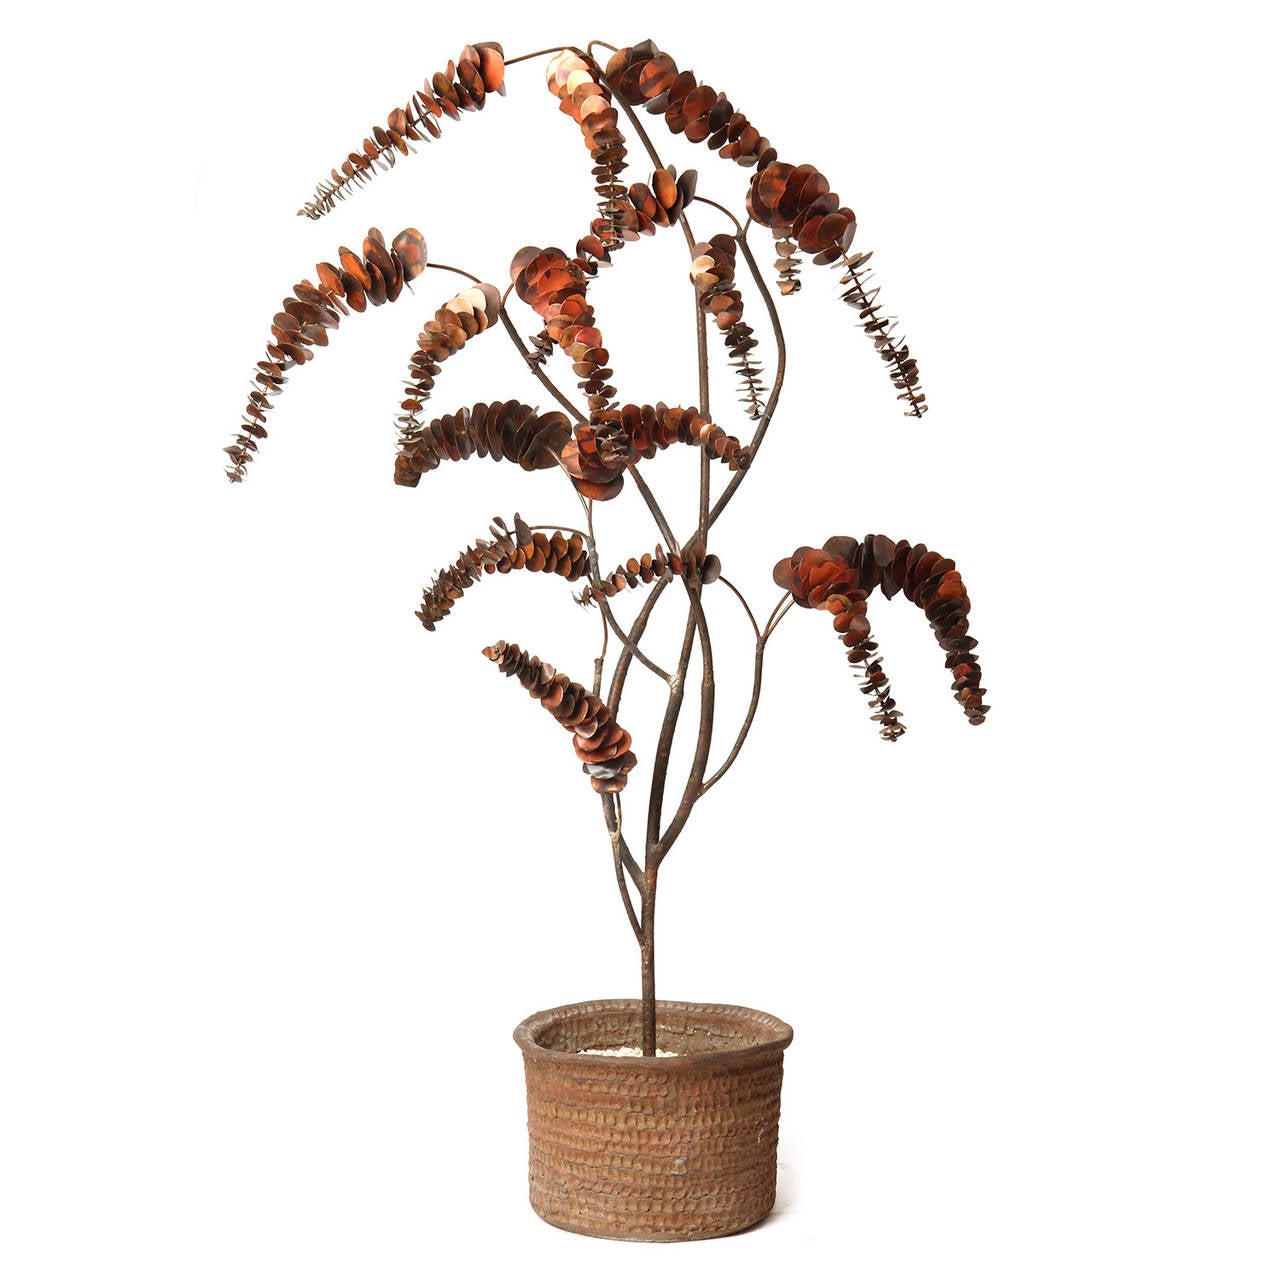 A stunning and exquisitely handcrafted life-size sculpture of a eucalyptus tree by artist John Steck. The tree is made of patinated copper and bronze and sits in its original hand thrown and signed ceramic pot. Made in the USA, circa 1960s.